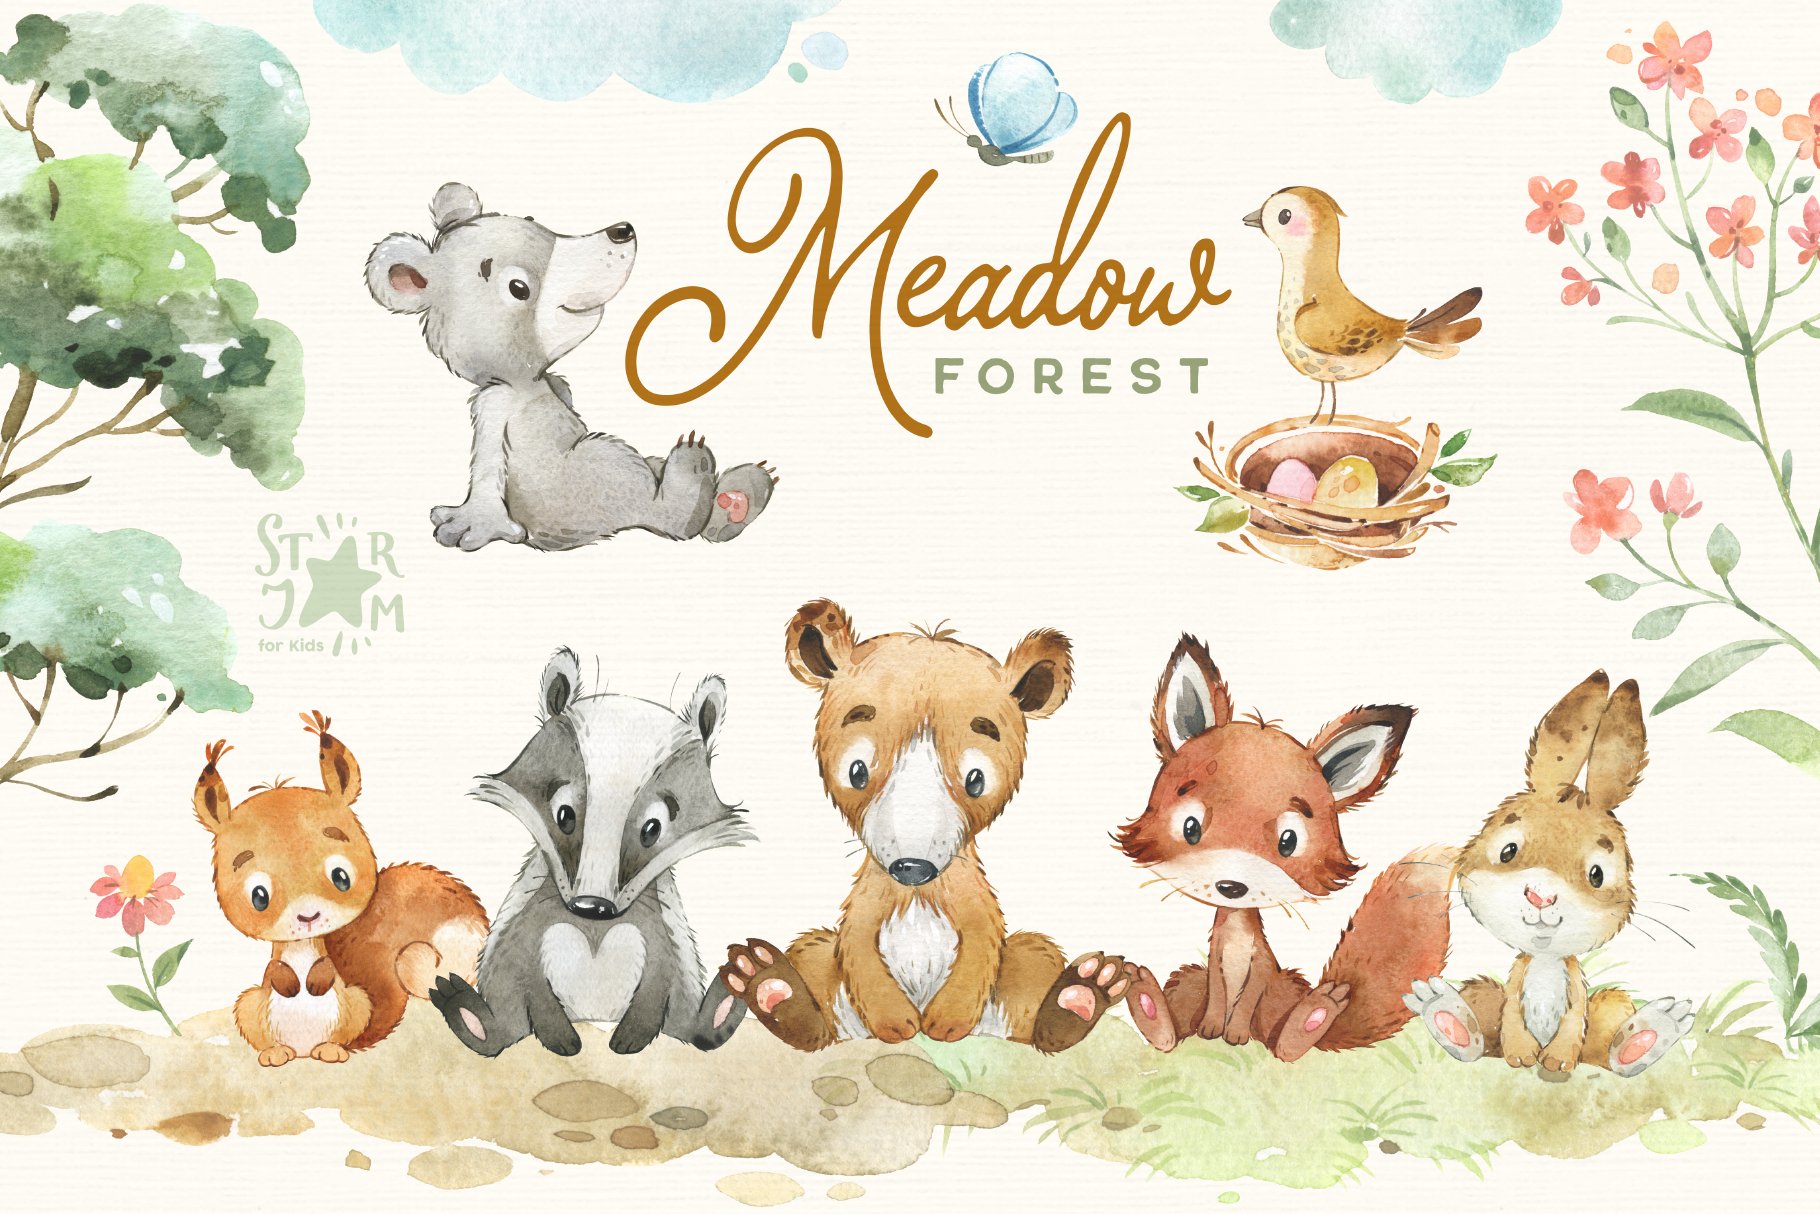 Forest Meadow Collection cover image.